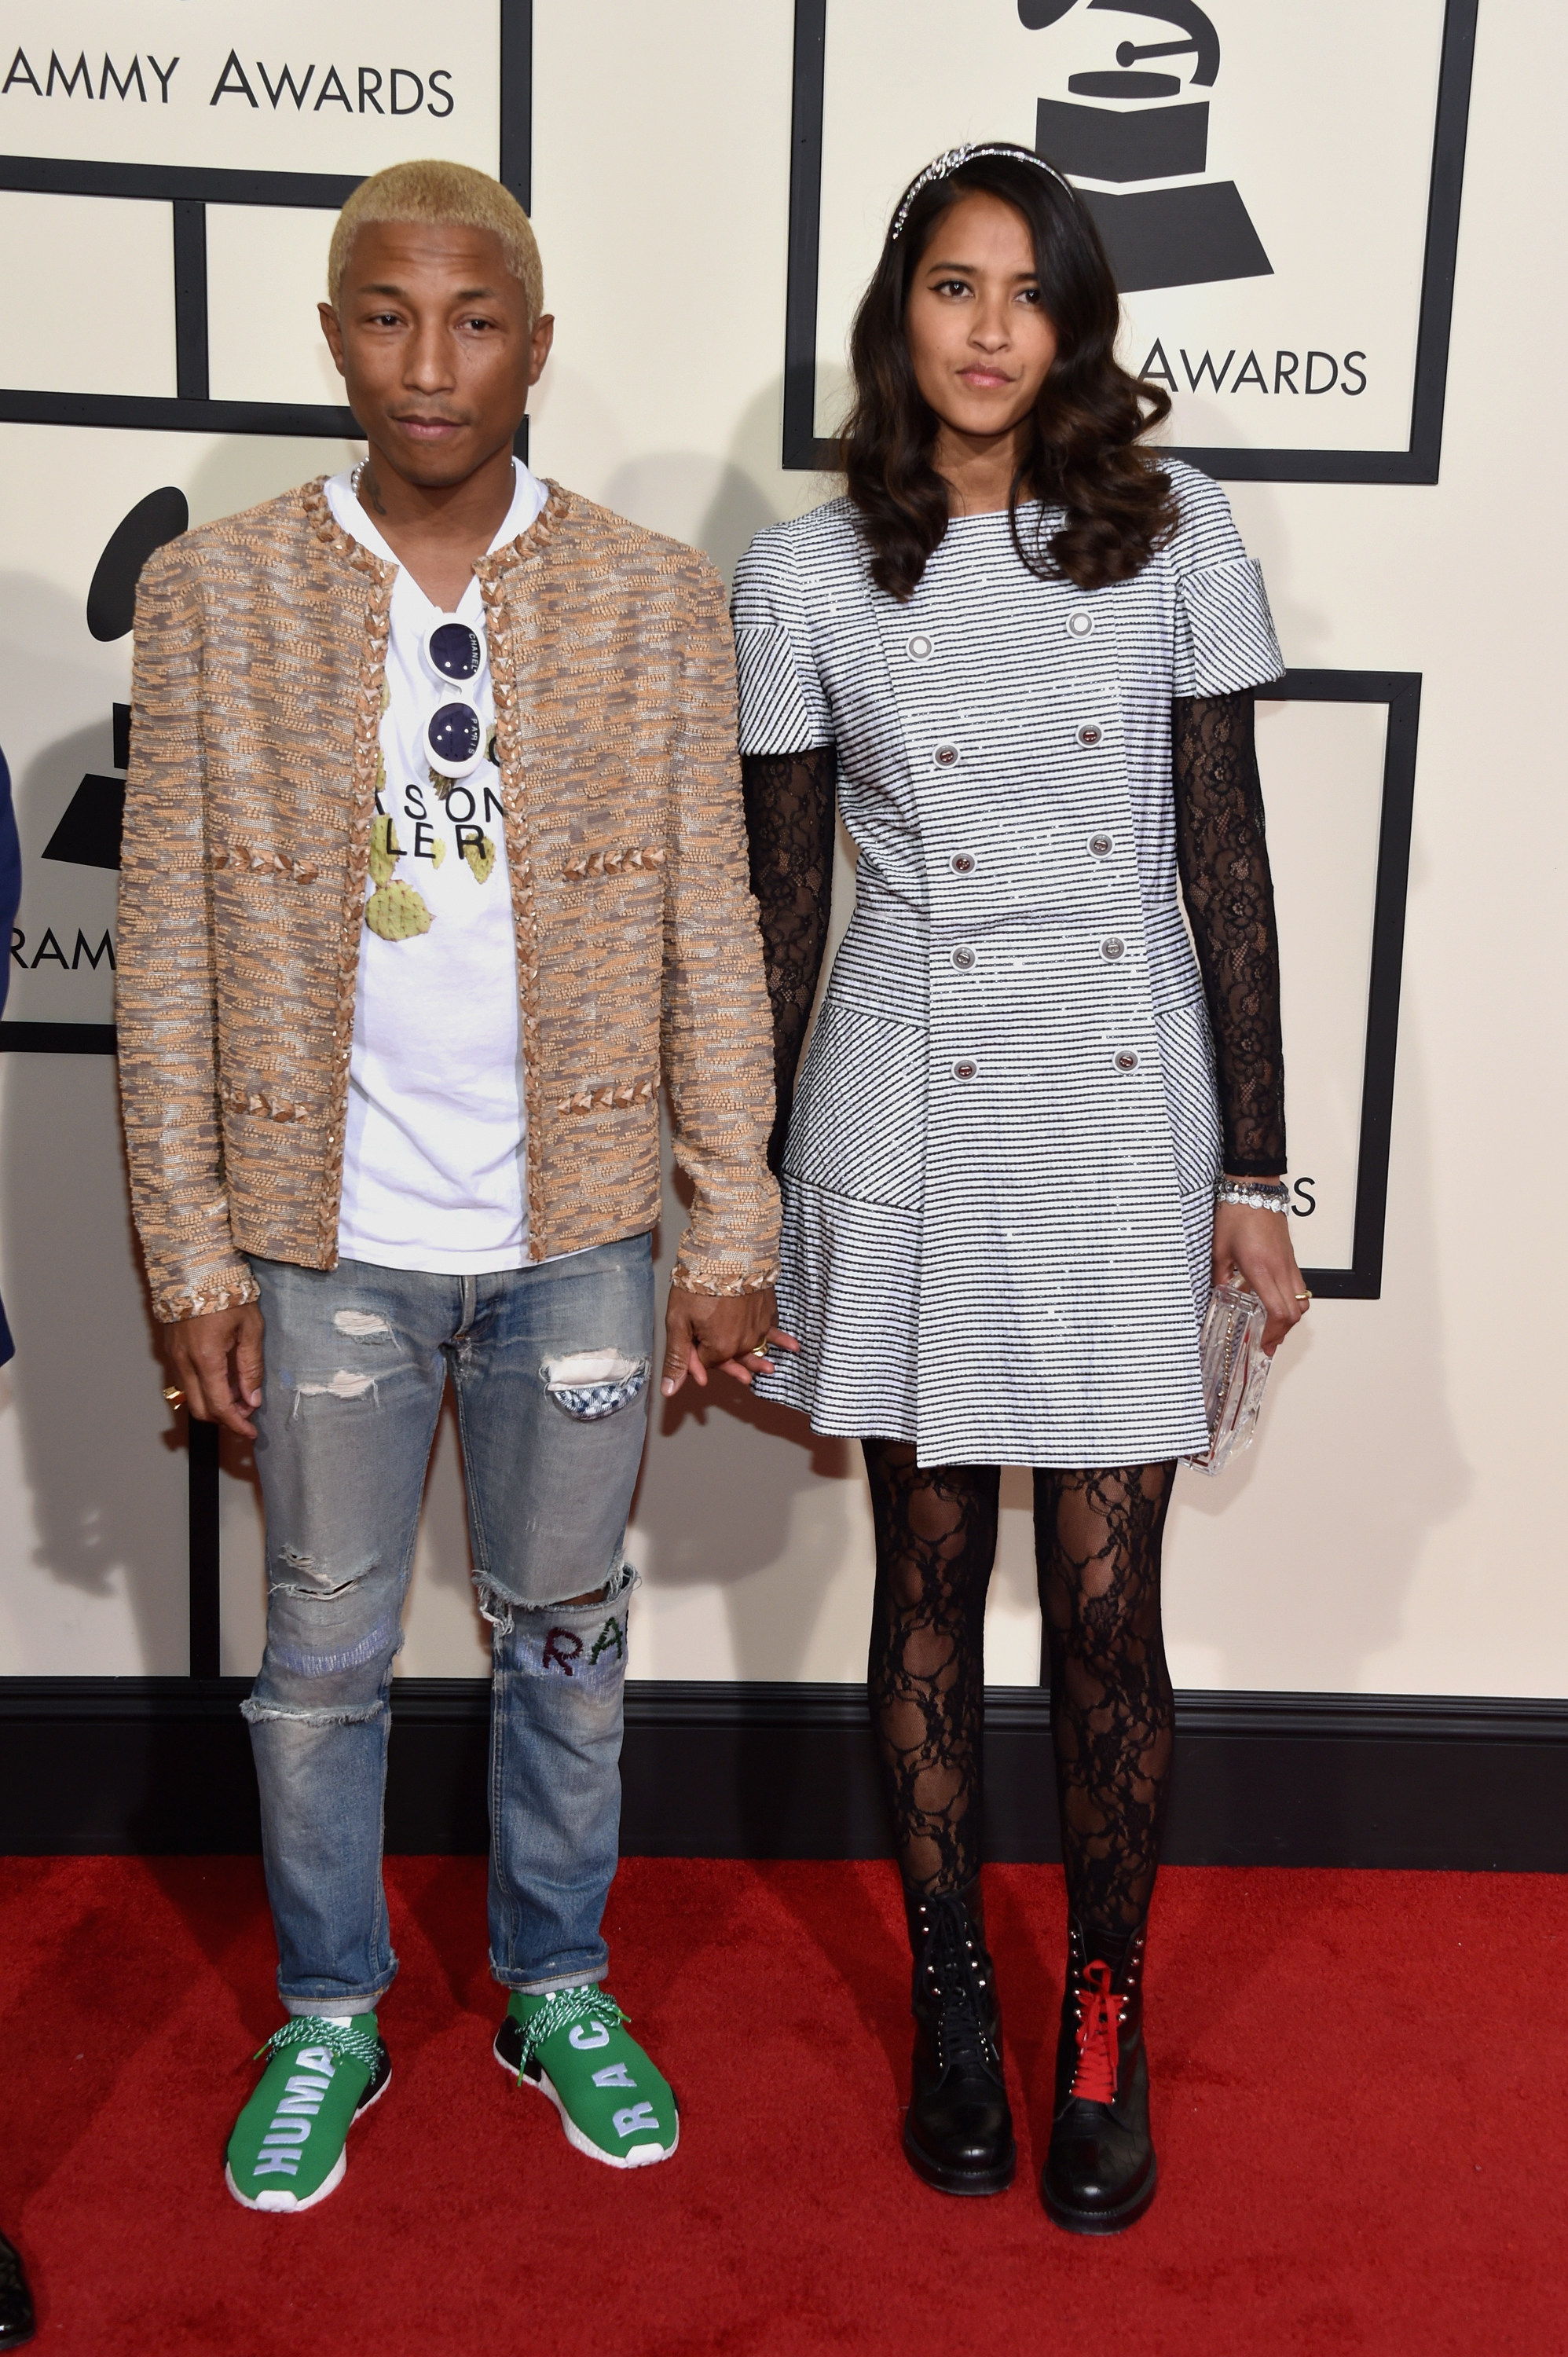 Pharrell Williams, left, and Helen Lasichanh, right, attend the 58th GRAMMY Awards at Staples Center on Feb. 15, 2016 in Los Angeles.